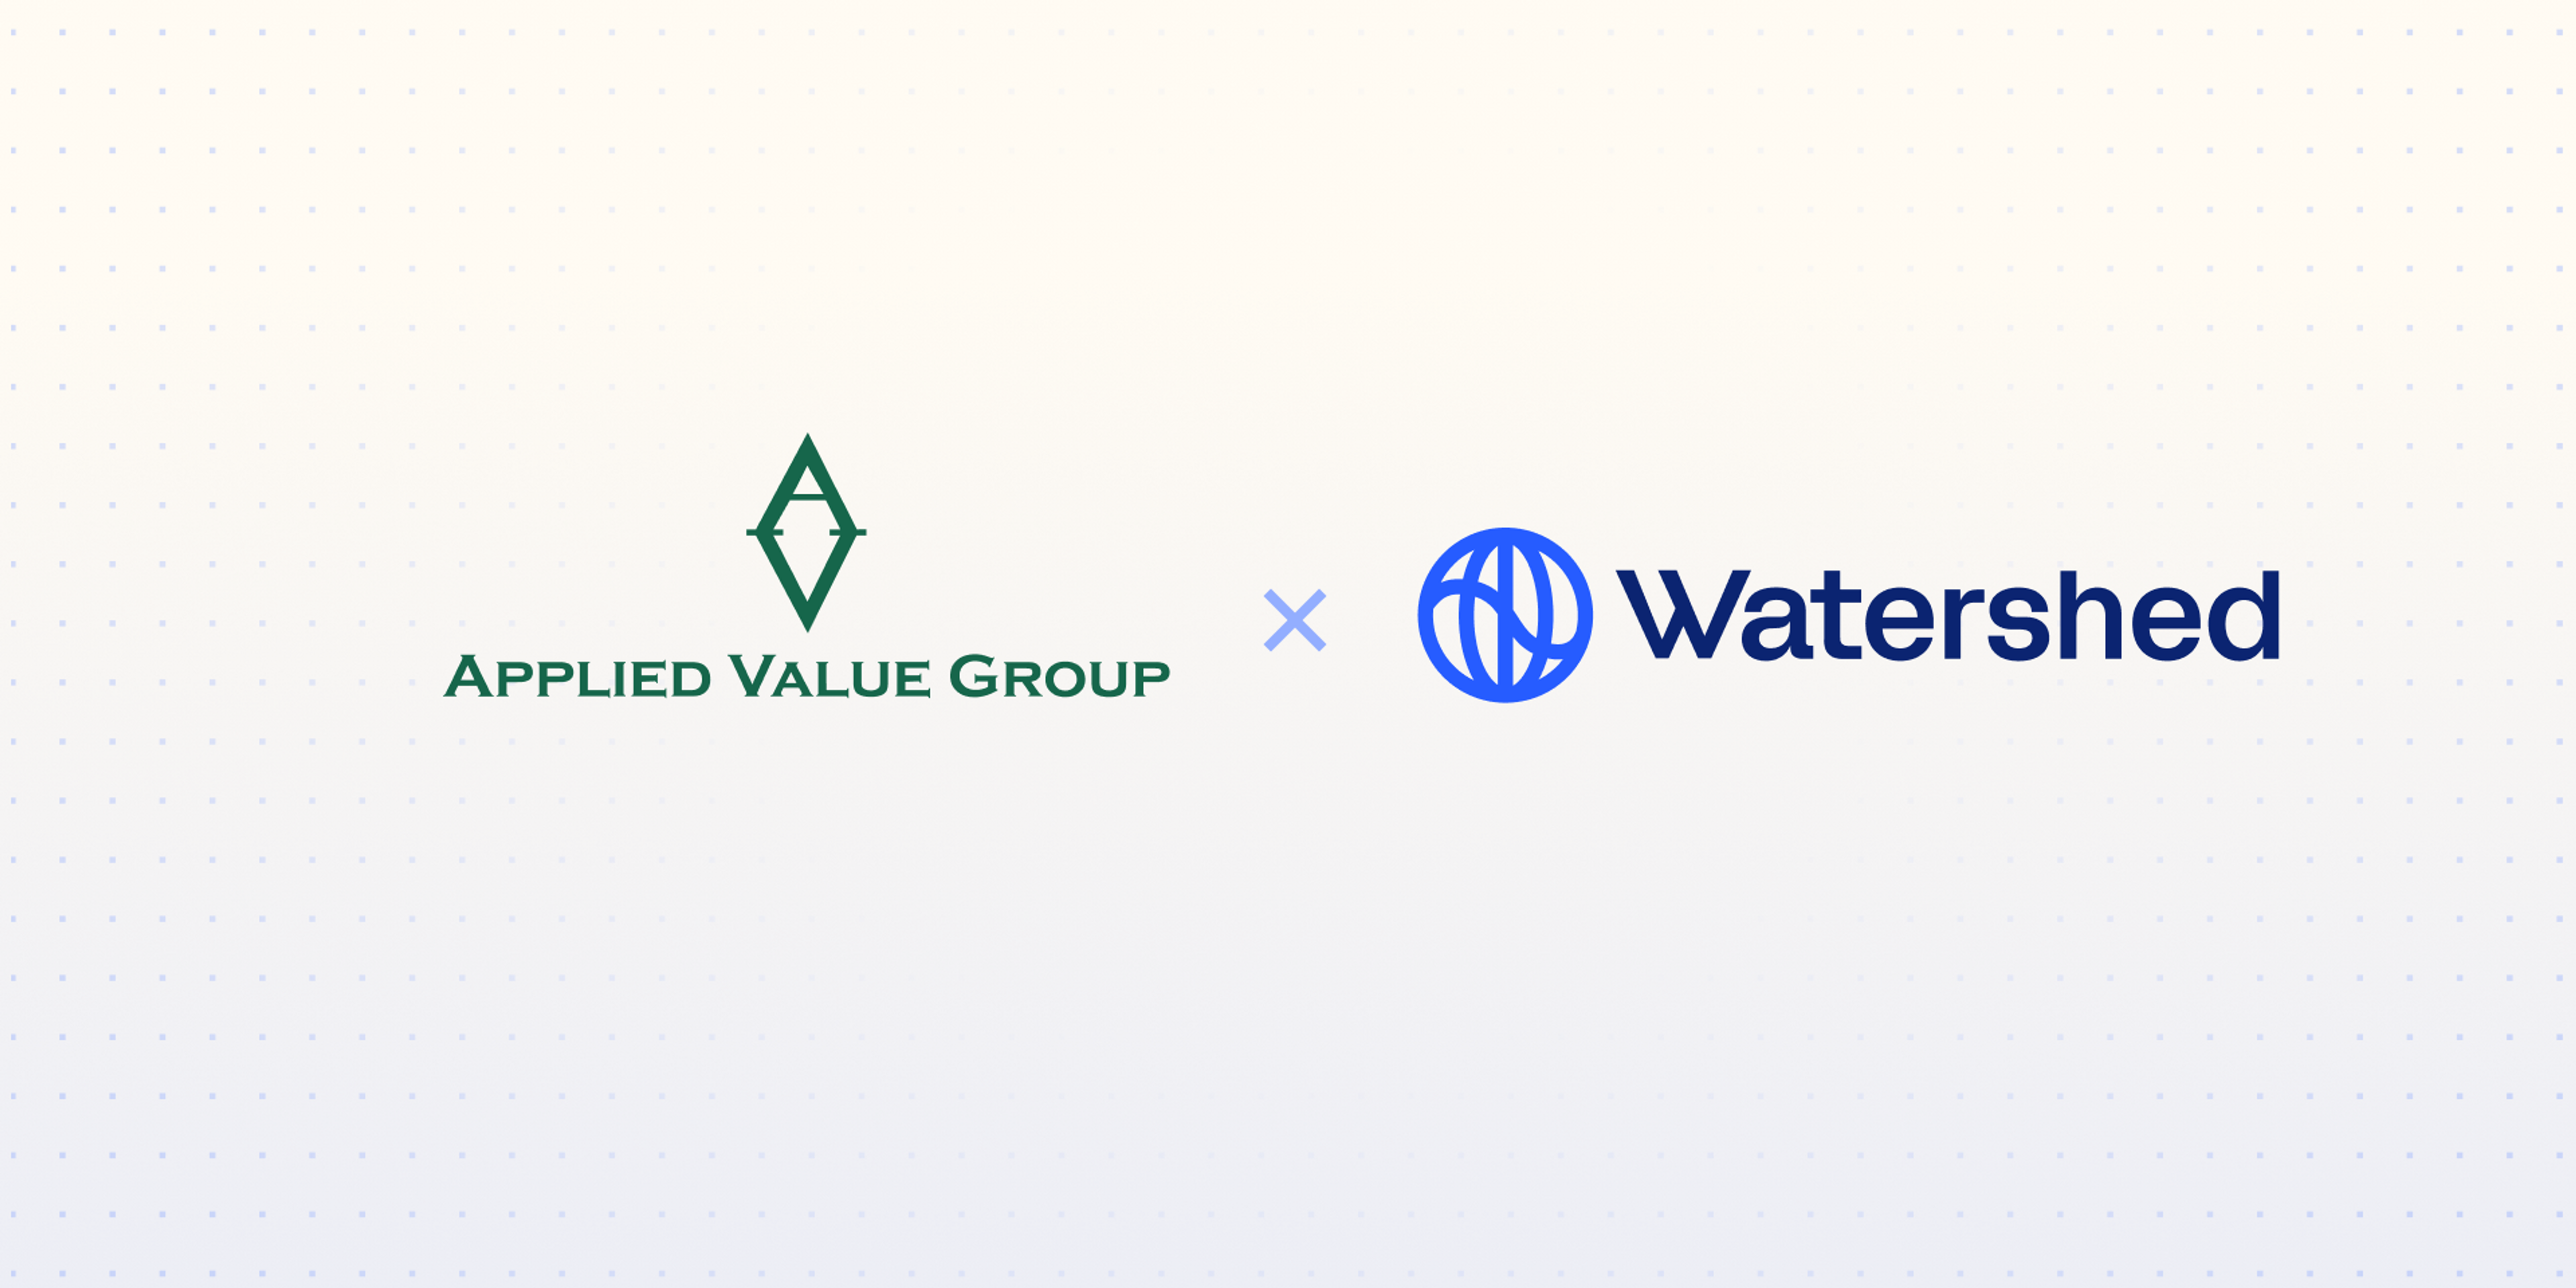 Applied Value Group and Watershed logos